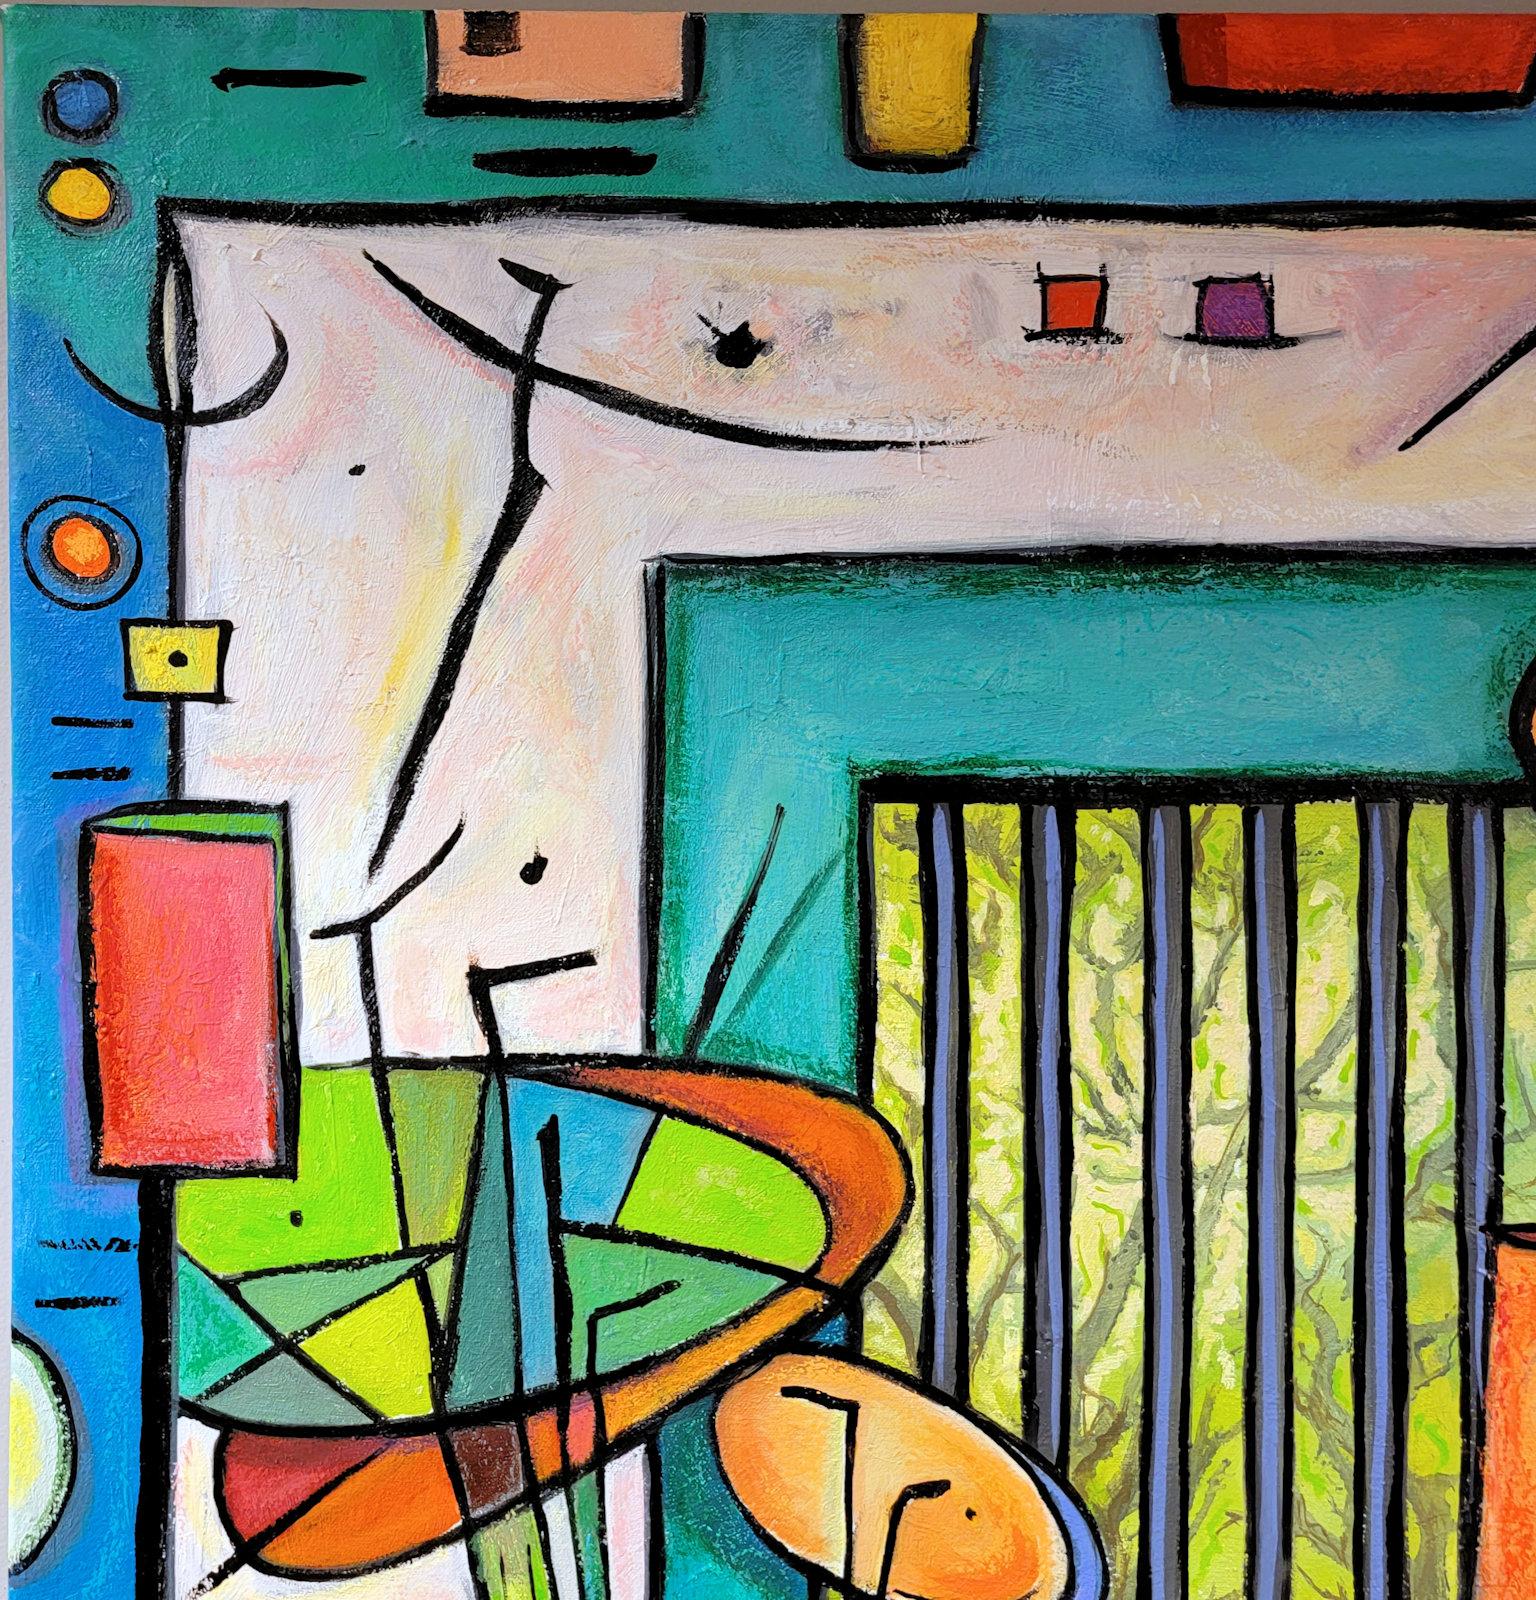 “Two Souls” is a 40 x 40 x 1.5 inch oil painting on canvas by Anita Loomis. A work from her “Couples” series, this vibrantly colored abstract composition offers an interior scene of two embracing figures in their home. It speaks to connections and